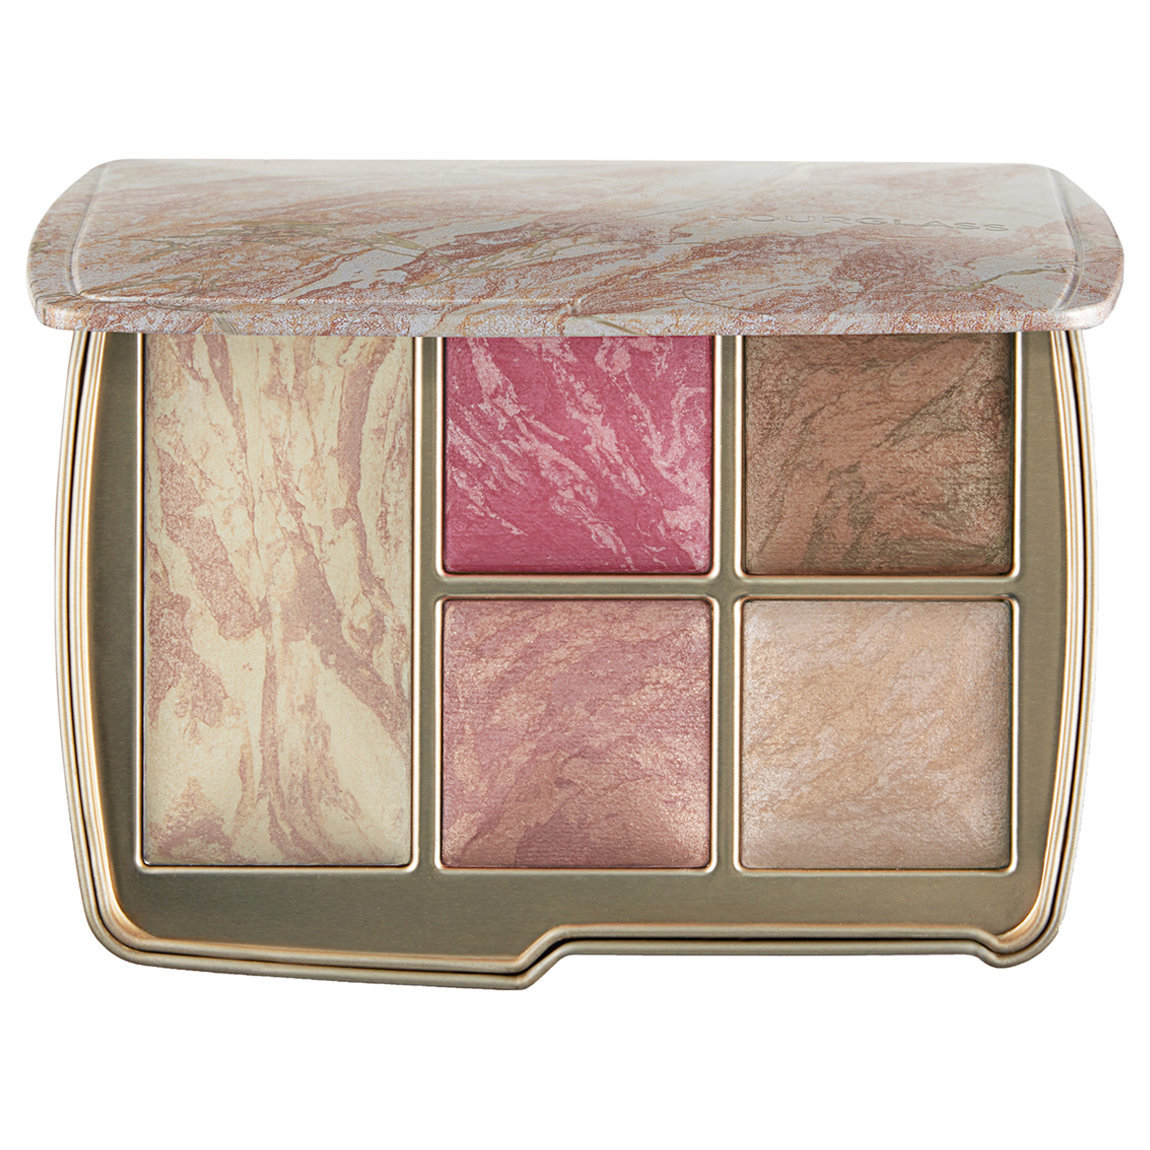 Hourglass Ambient Lighting Edit - Universe alternative view 1 - product swatch.